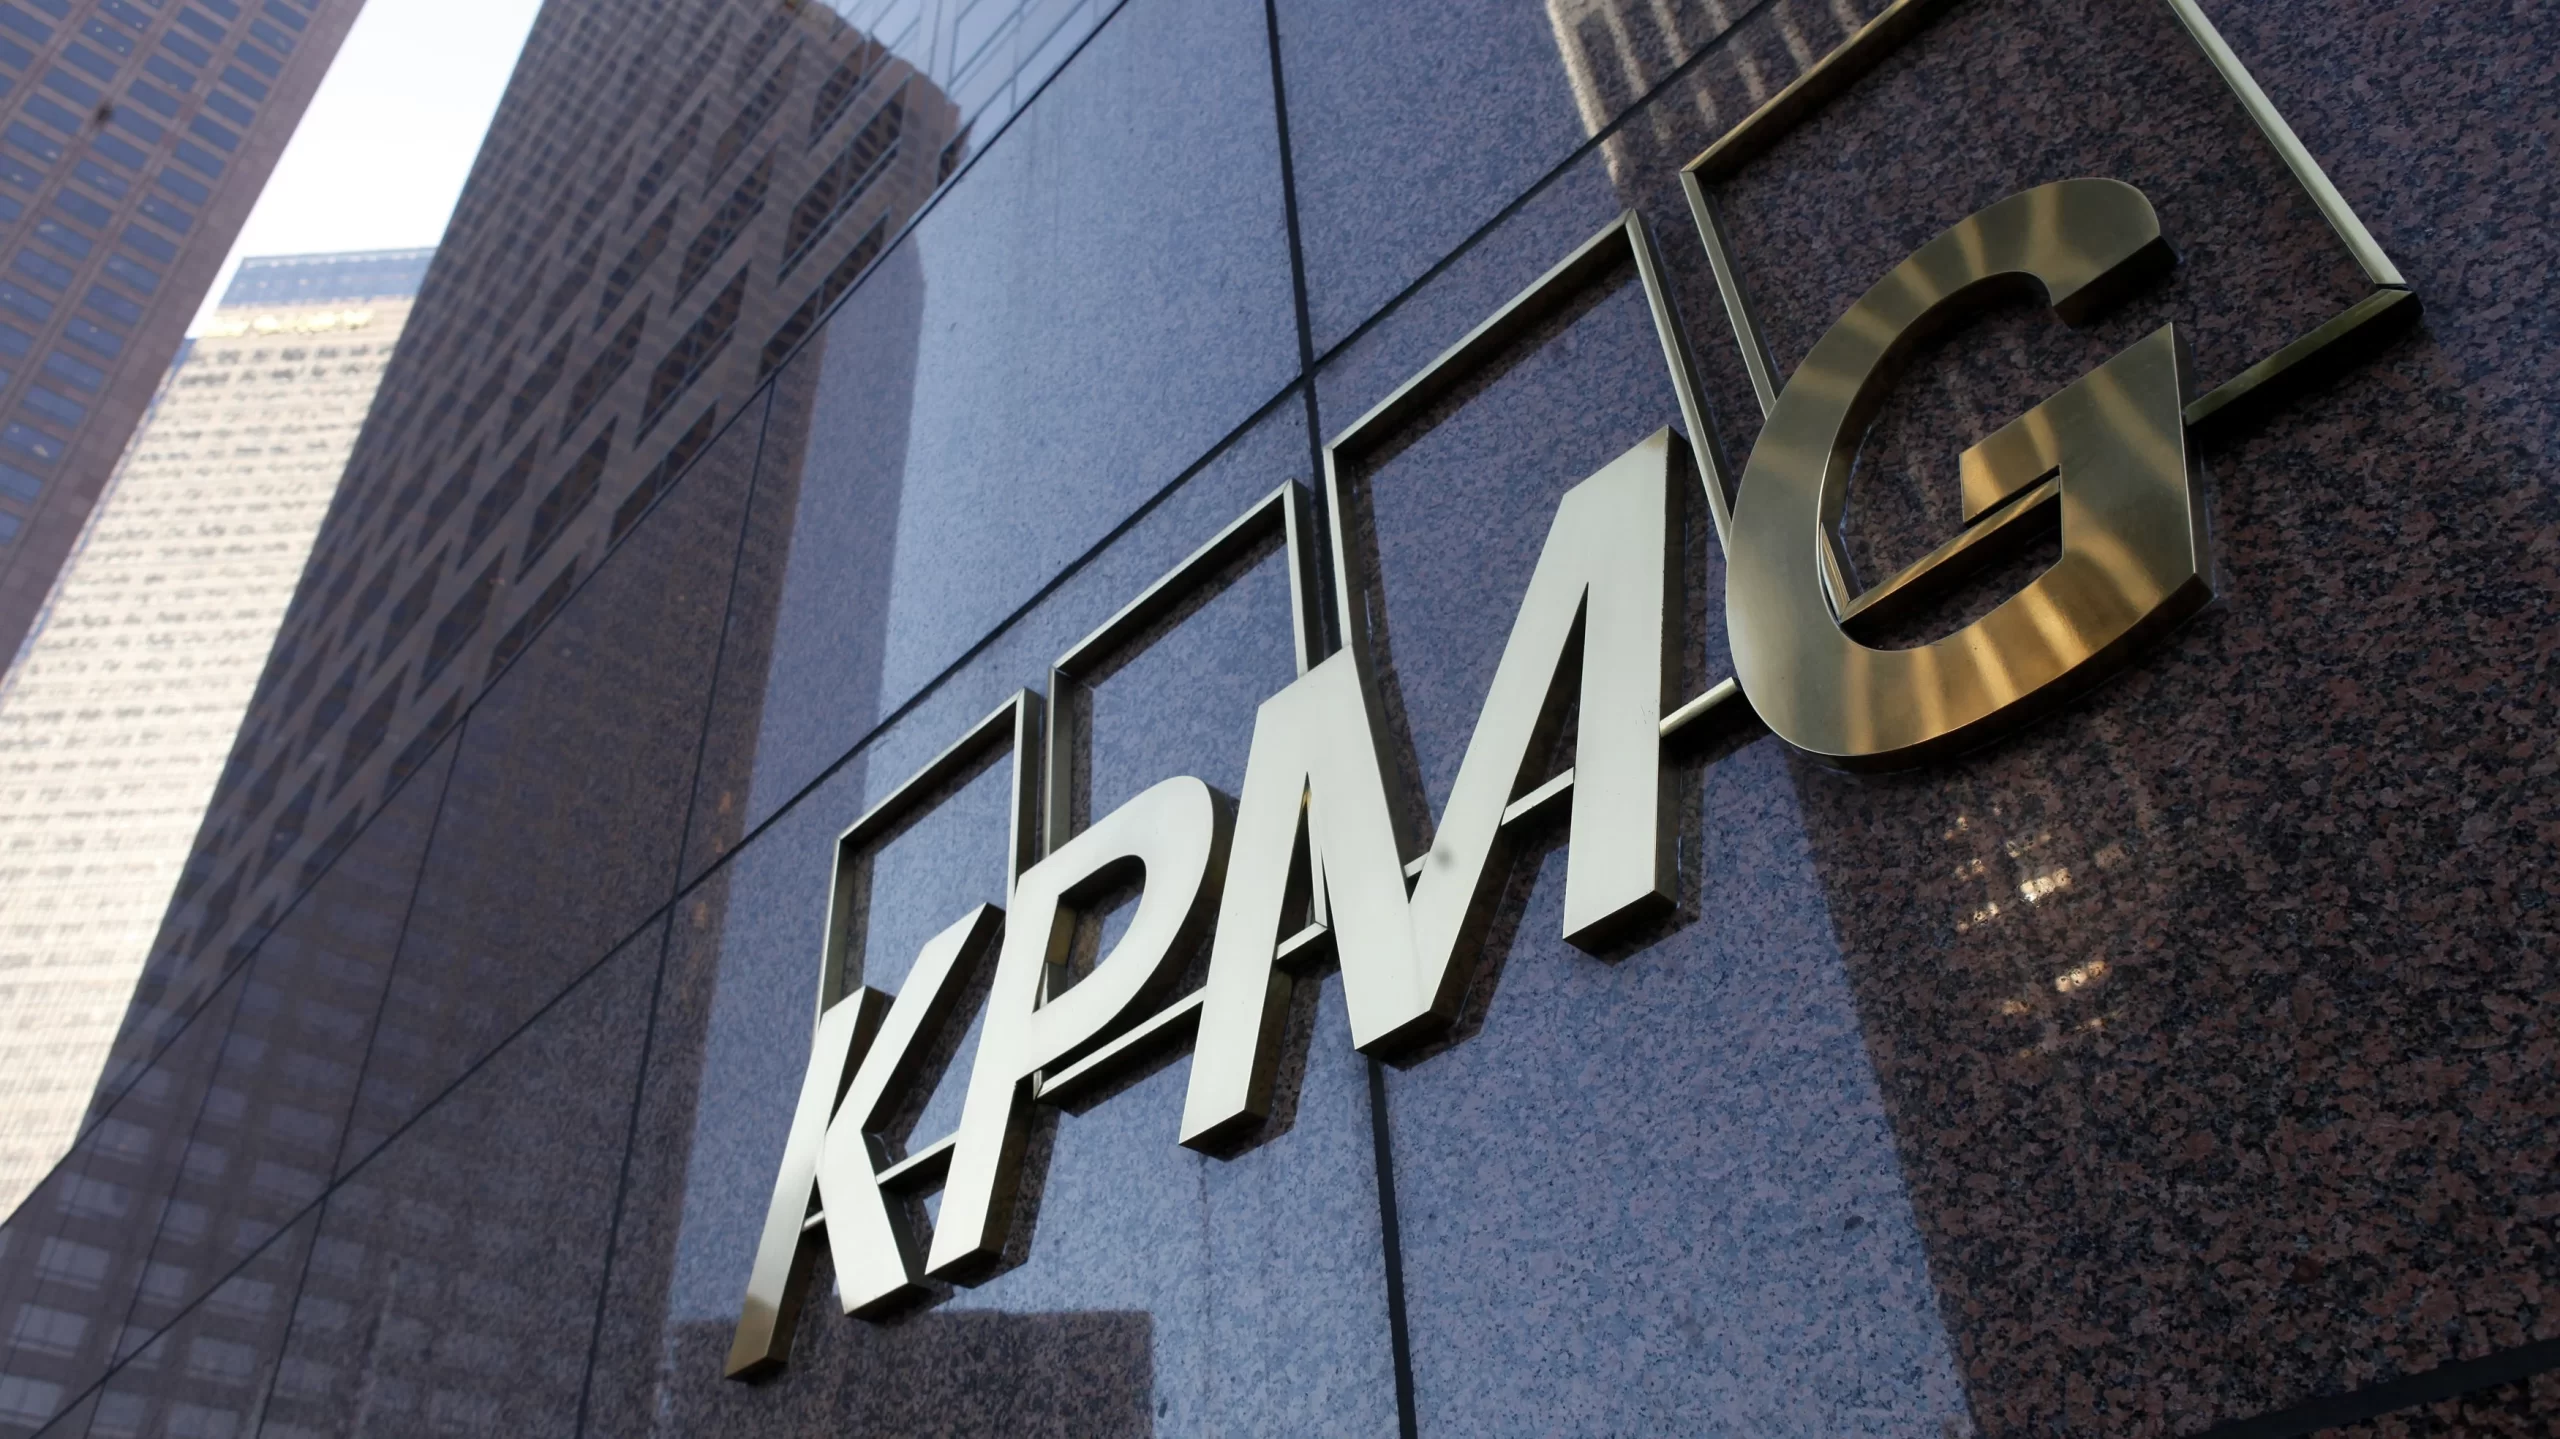 Why FG should reconsider implementation of cybersecurity levy--KPMG